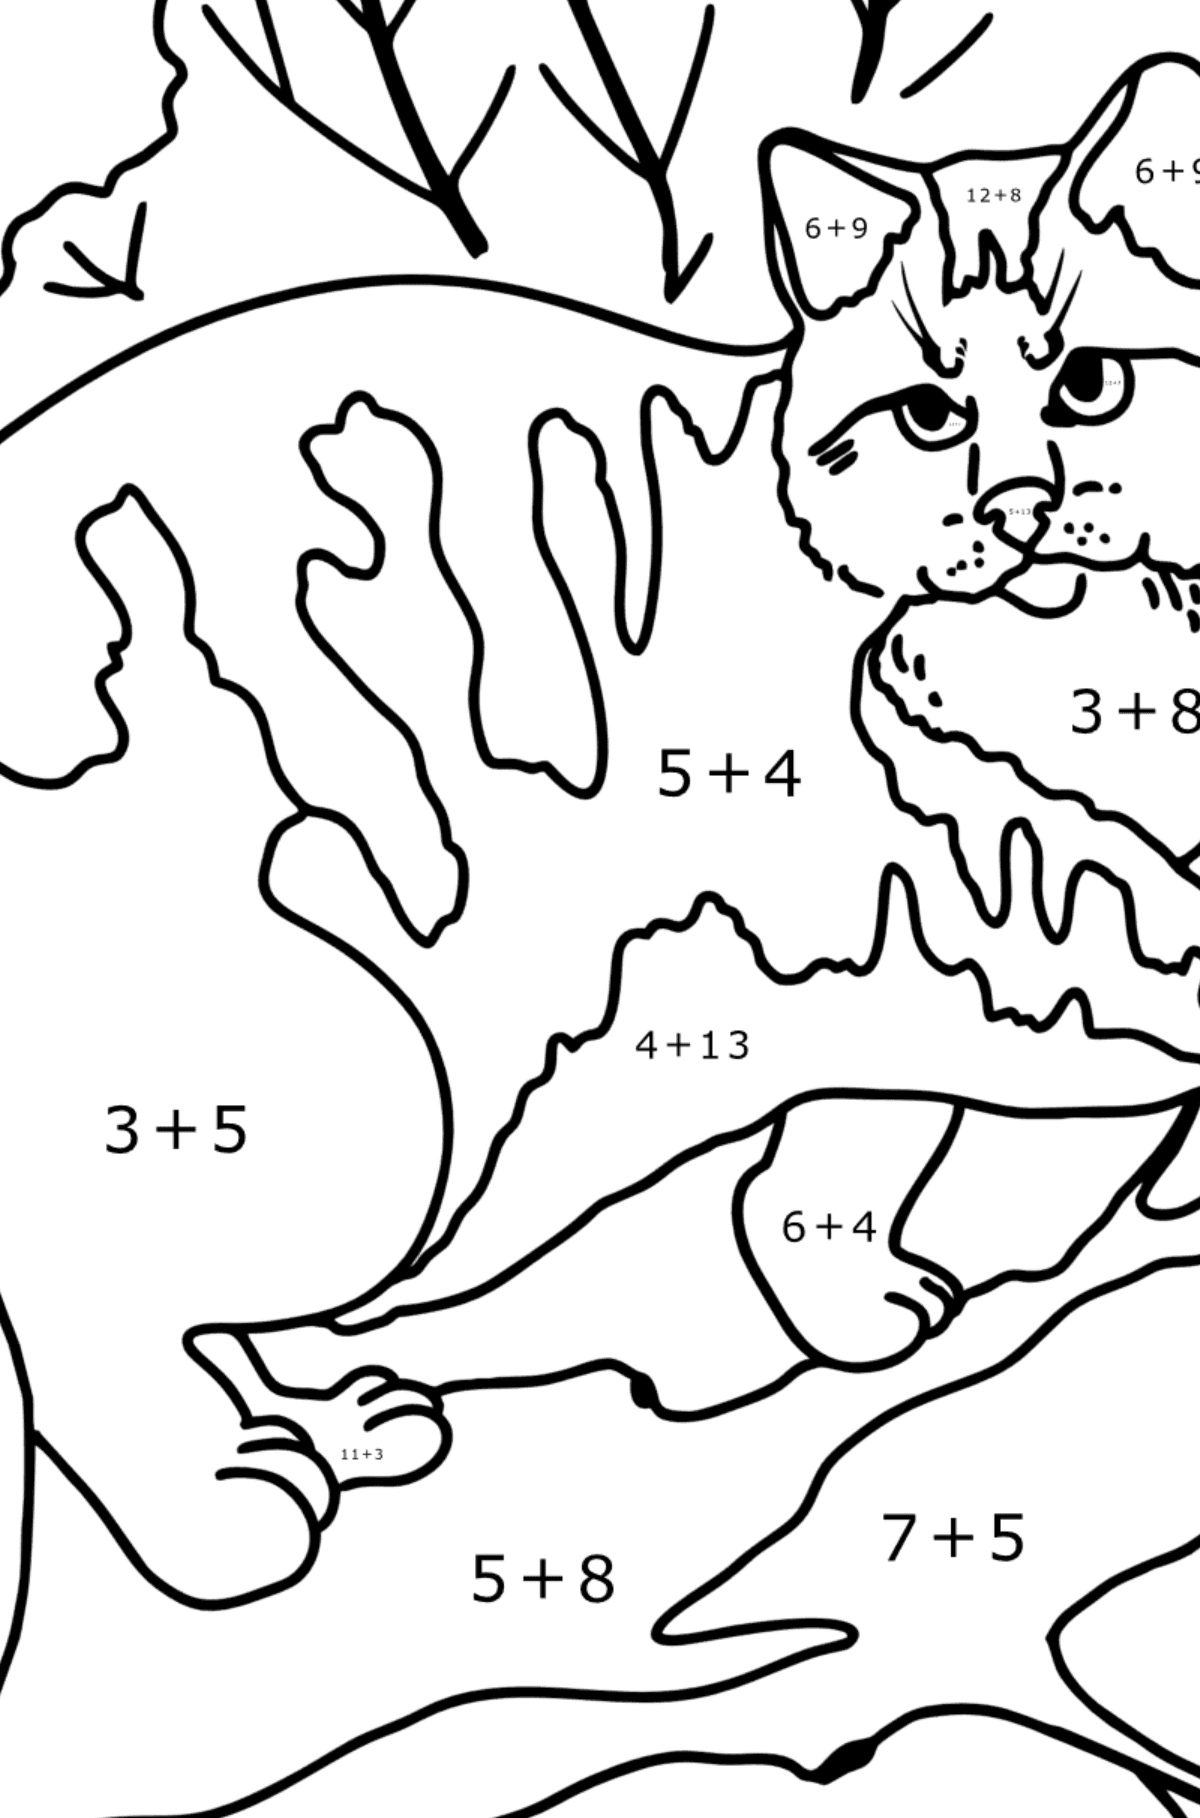 Wild Forest Cat coloring page - Math Coloring - Addition for Kids